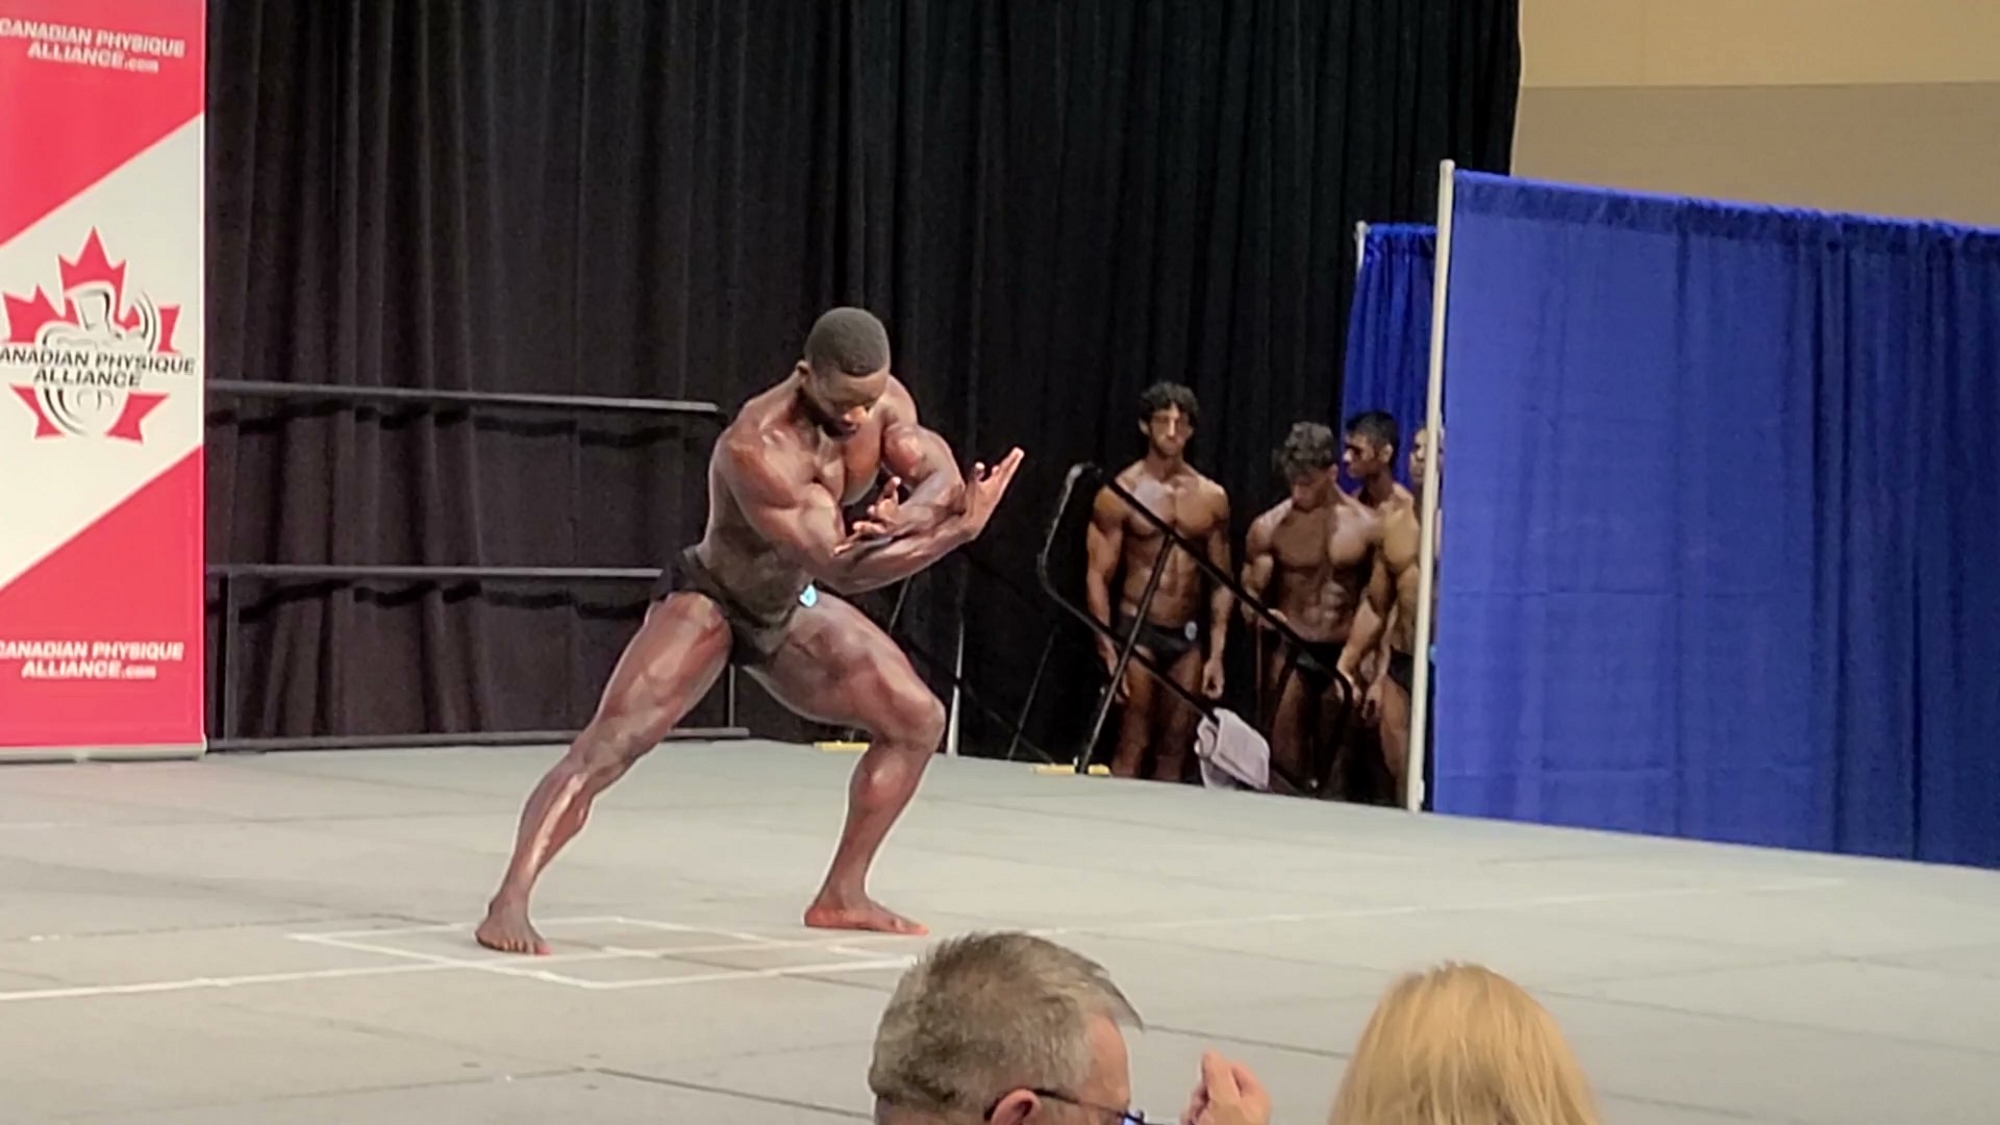 Amazing and fluid poses by bodybuilder. Bodybuilding posing routine.